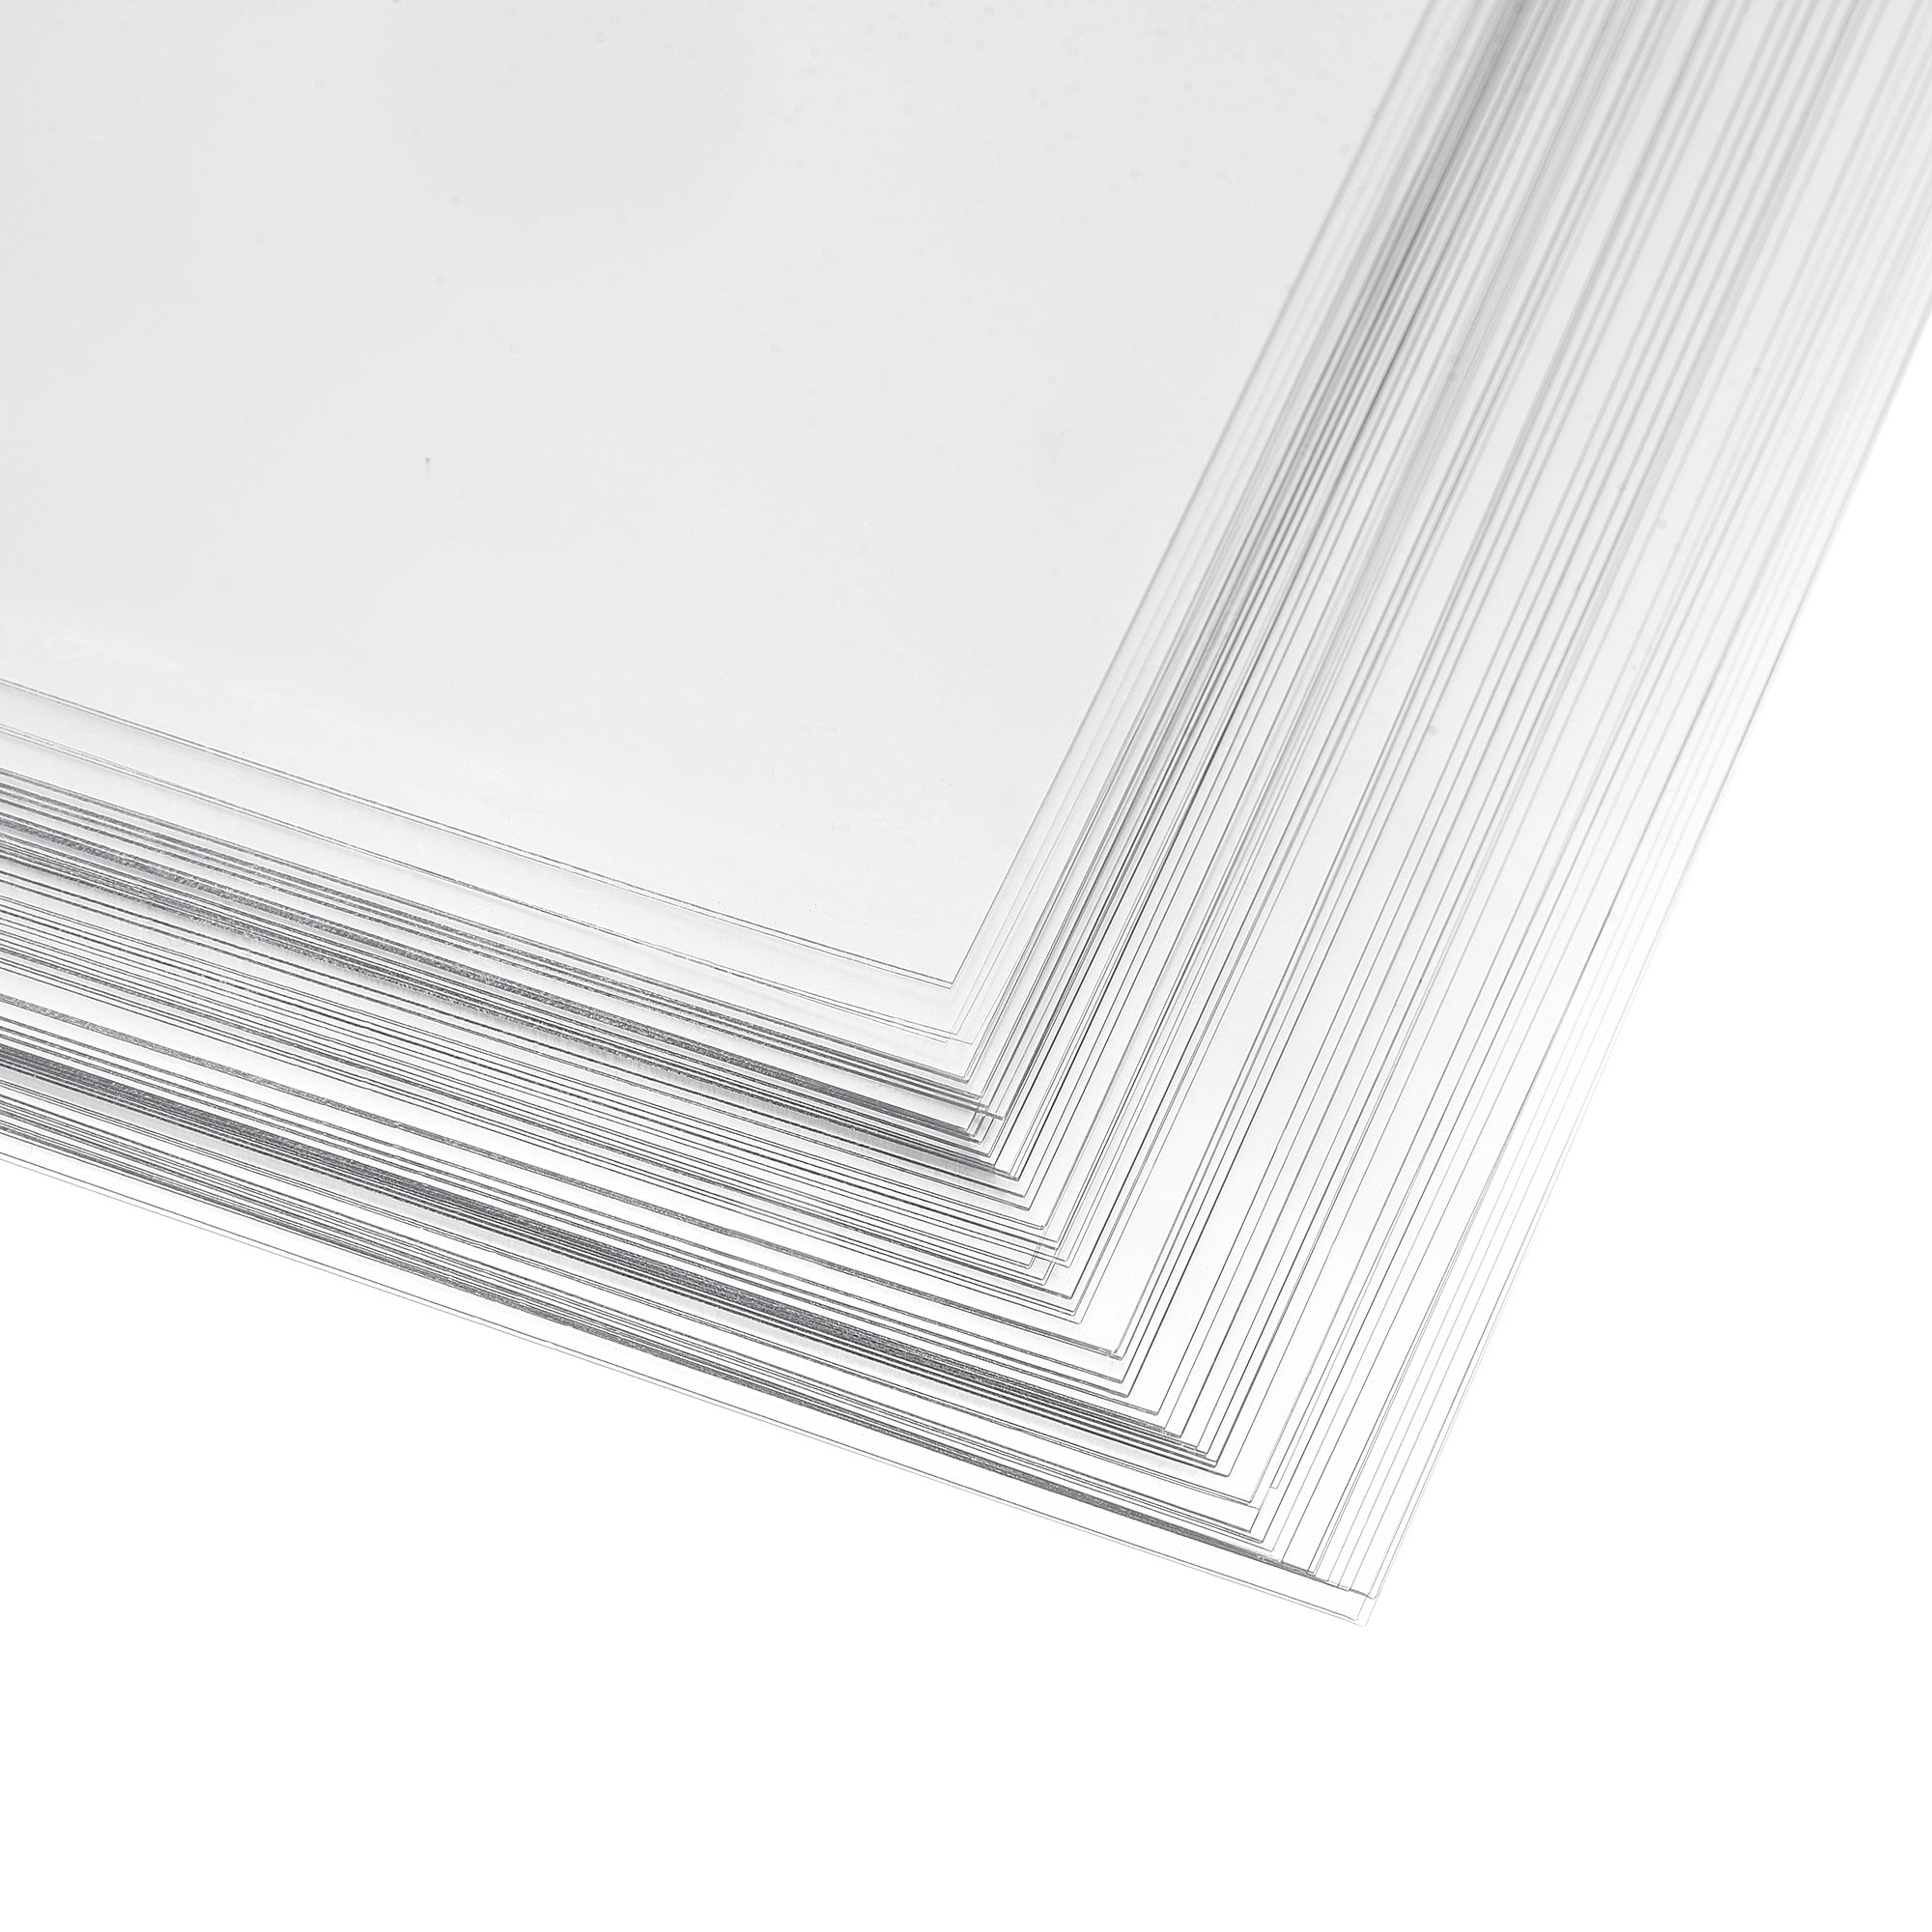 297mm x 210mm A4 Flexible Plastic Dry Wipe White Boards 3 Styles Pack of 100 